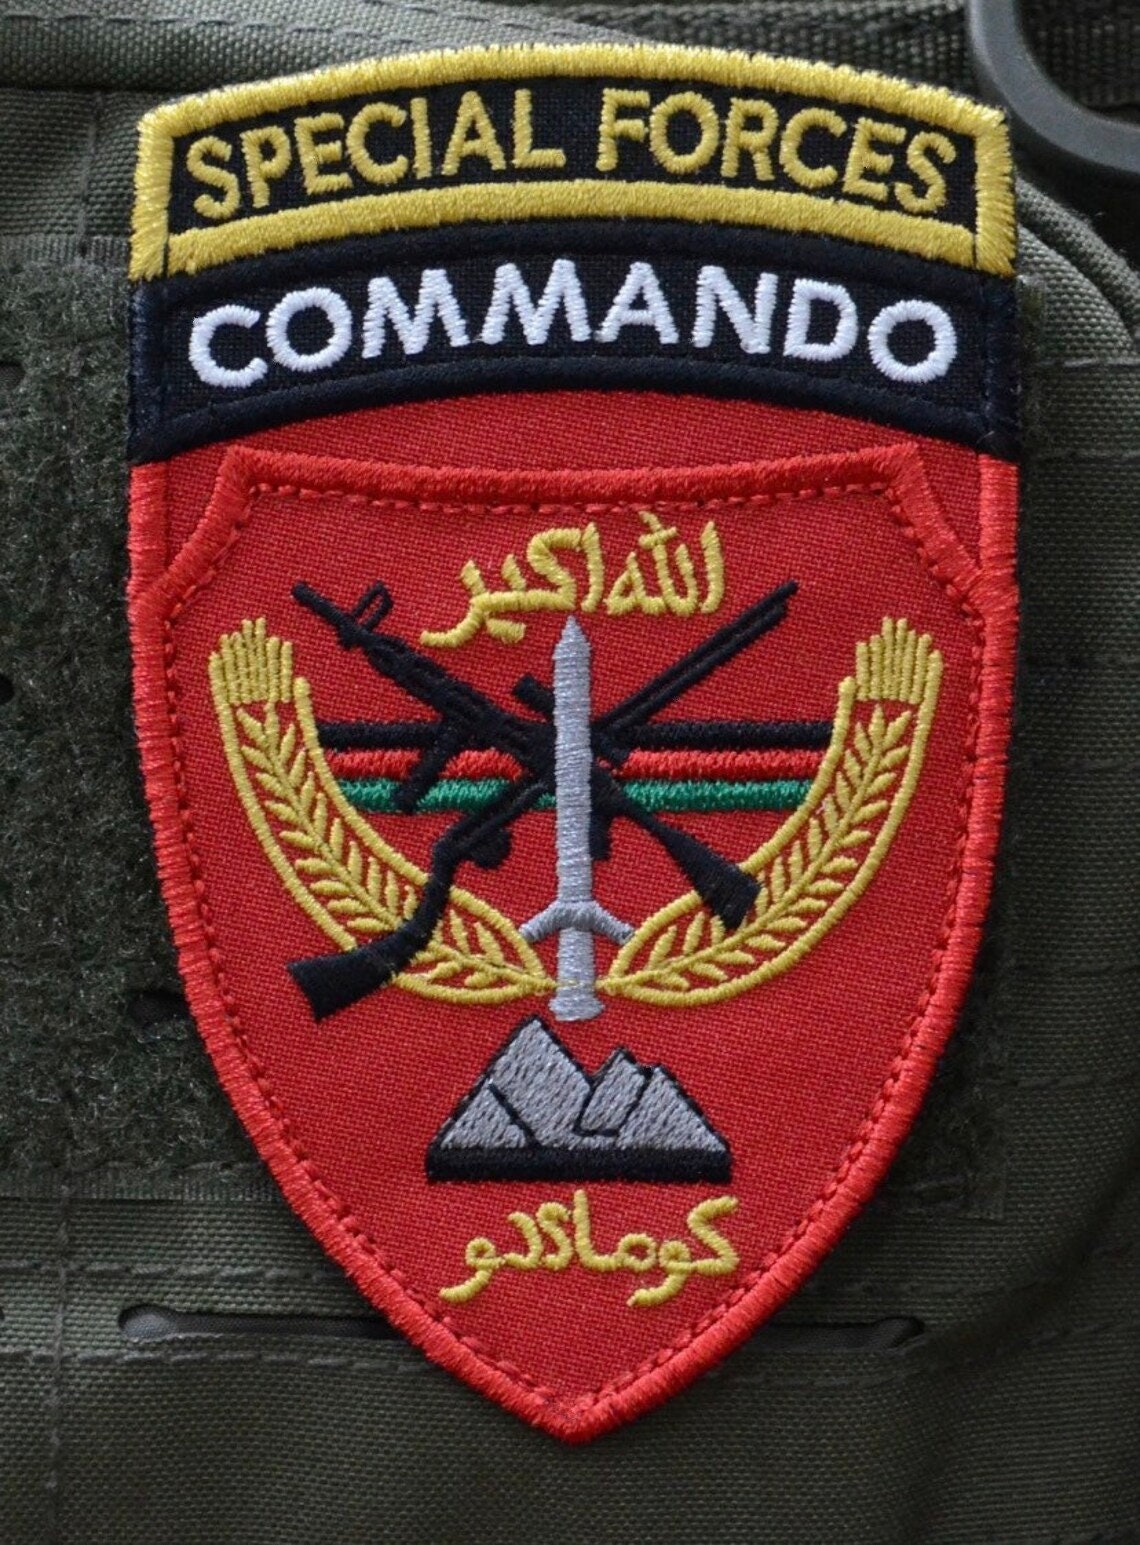 Afghanistan US Army Special Forces Commando Patch Tactical morale military patch